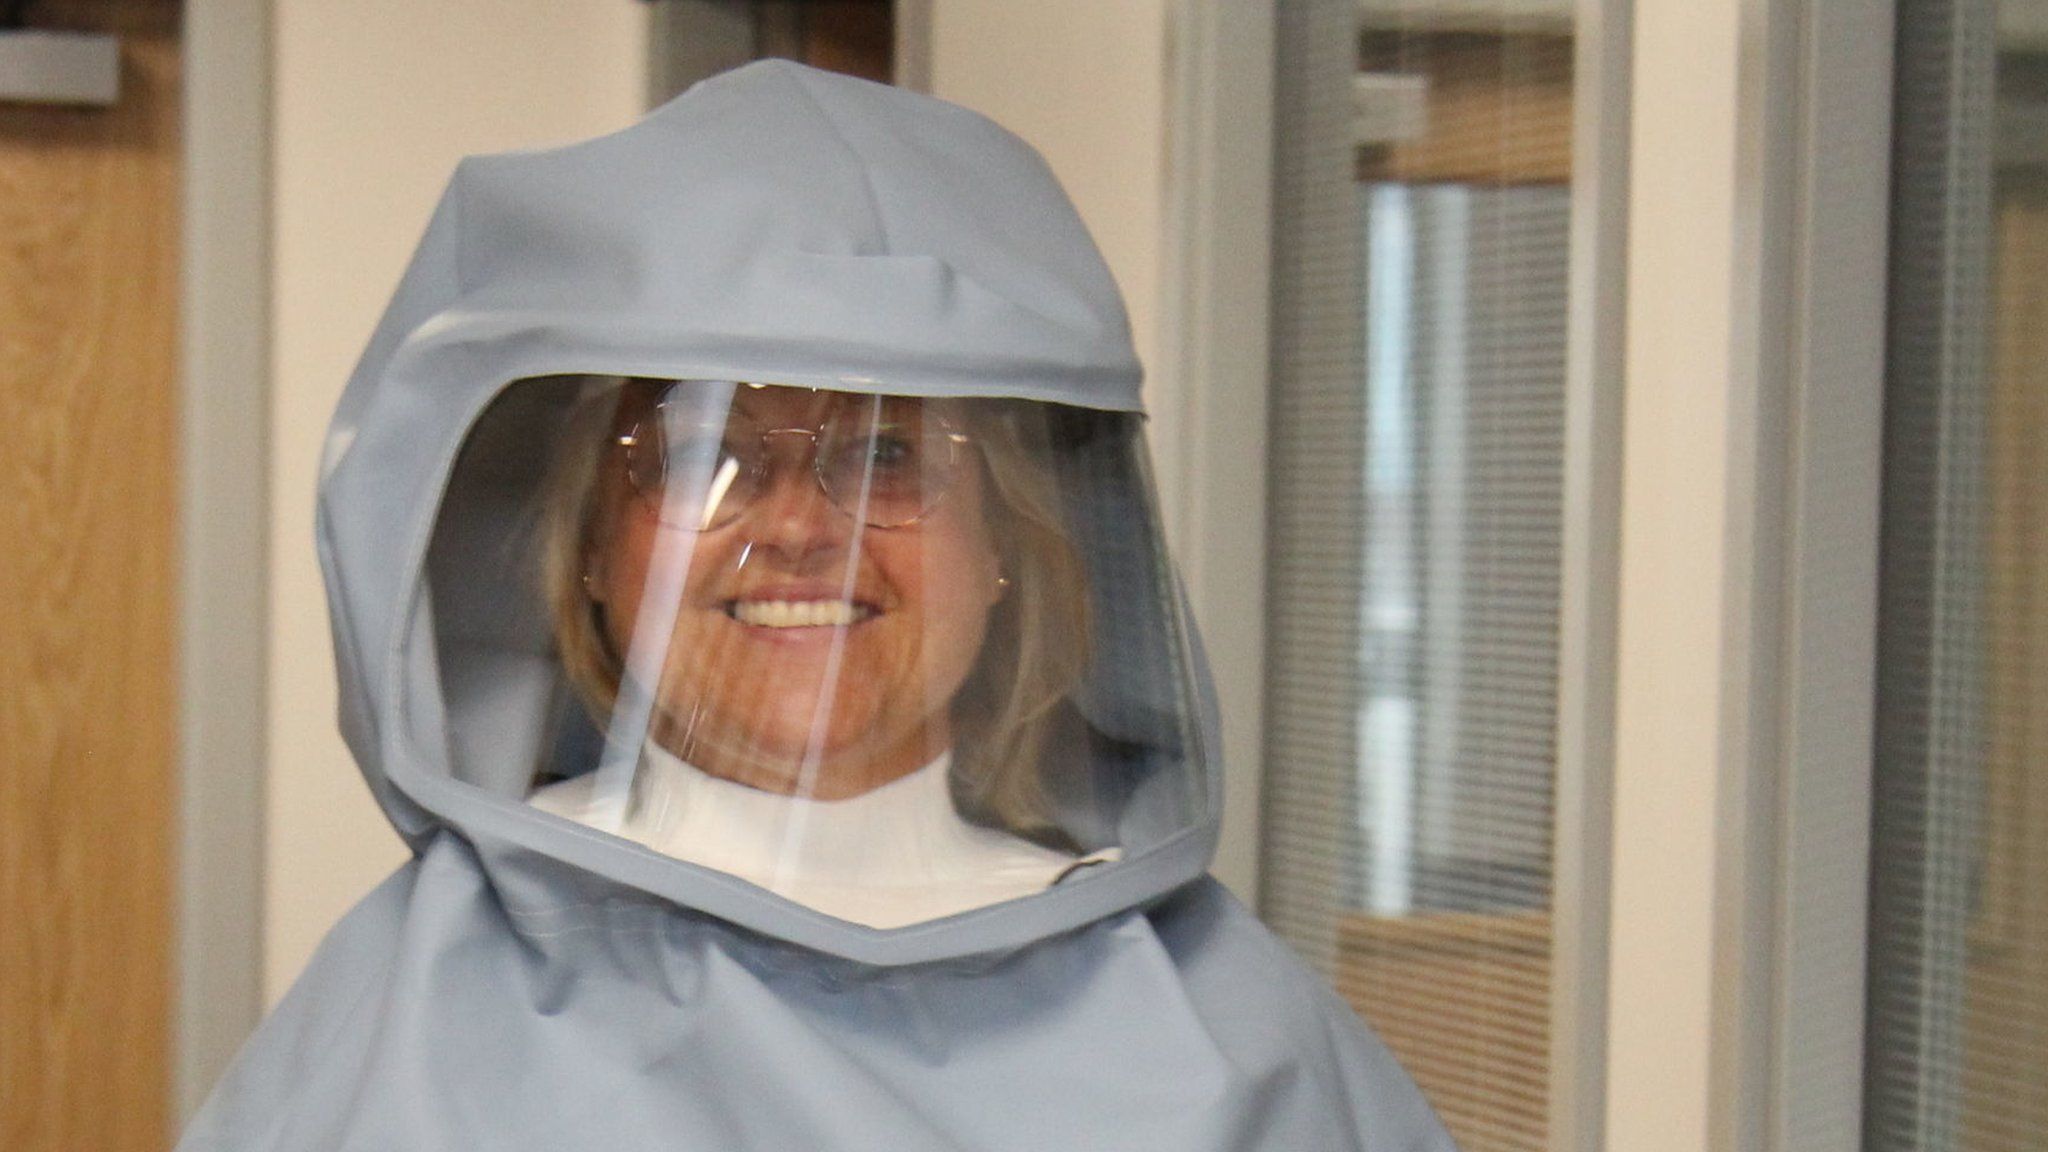 Matron Sally Young wearing the new full-face protective hood